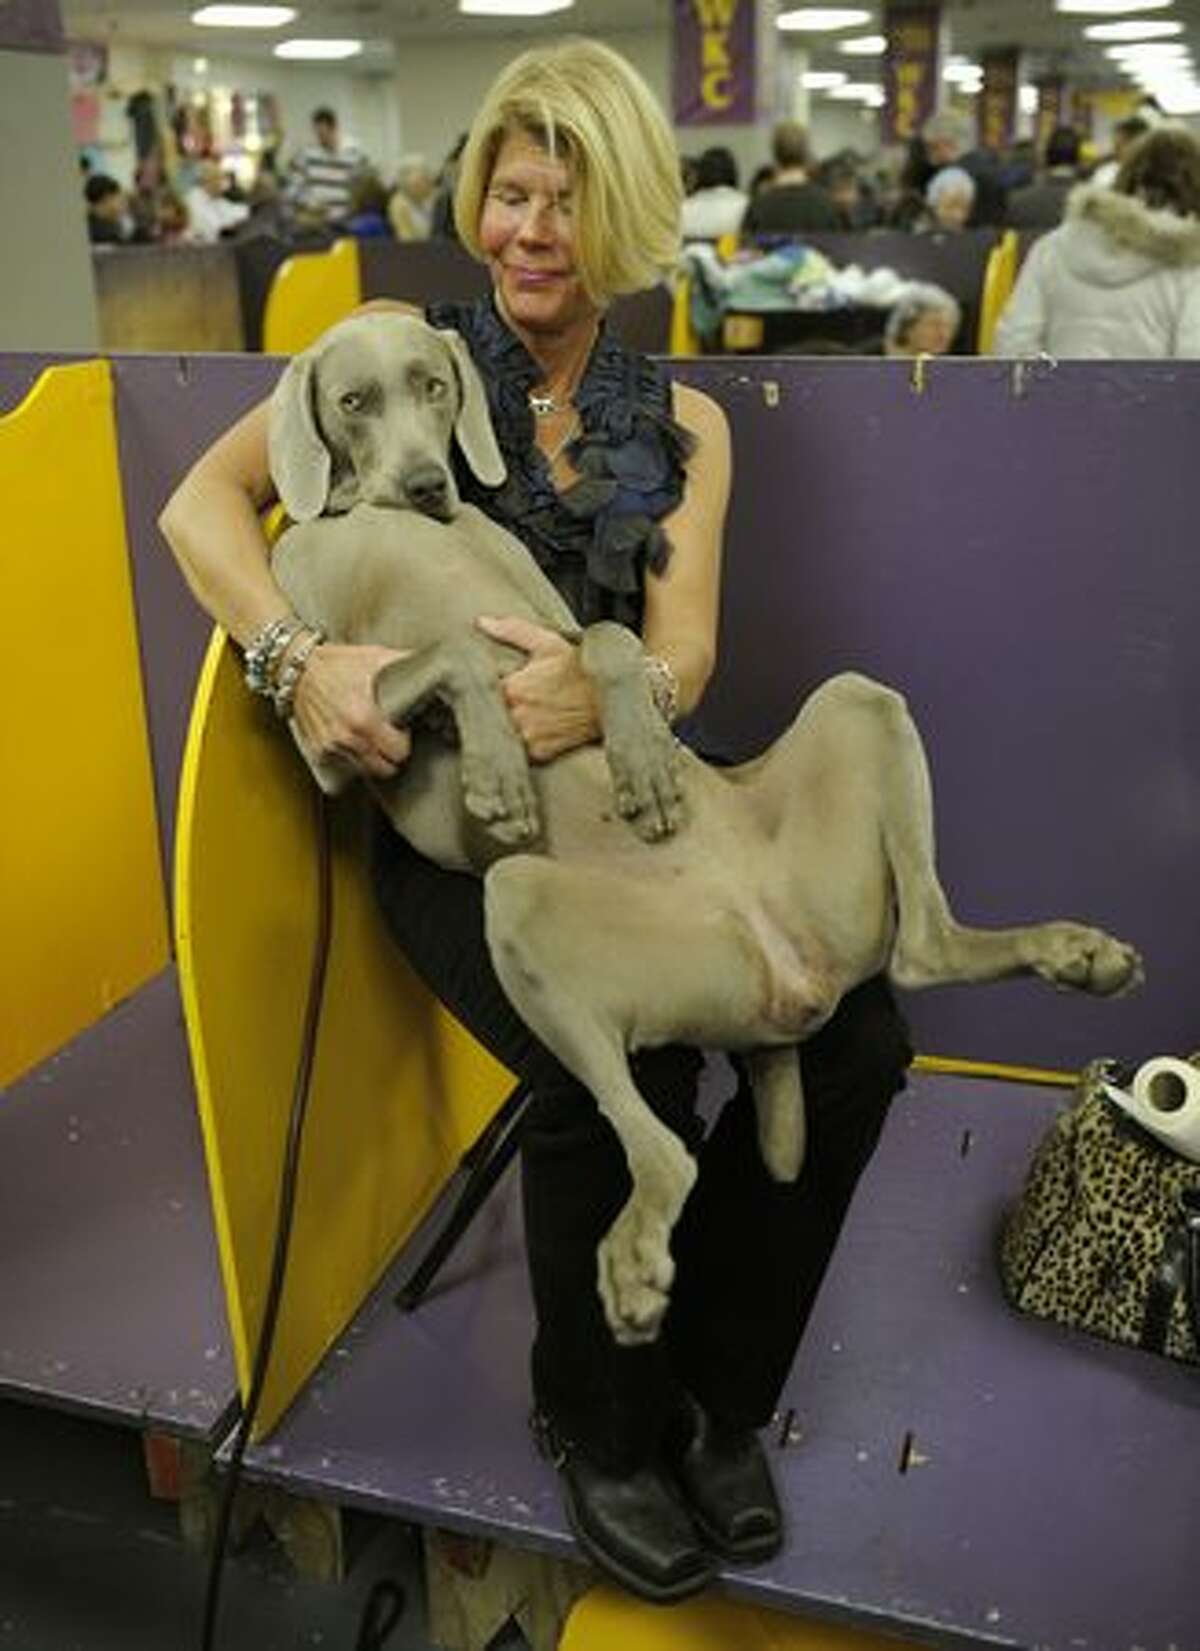 Jennifer Martin, with her Weimaraner named Sizzle, during the final day of the 134th Westminster Kennel Club Dog Show at Madison Square Garden in New York, February 16, 2010. The country's premier dog show runs for two days with the Best in Show picked tonight.